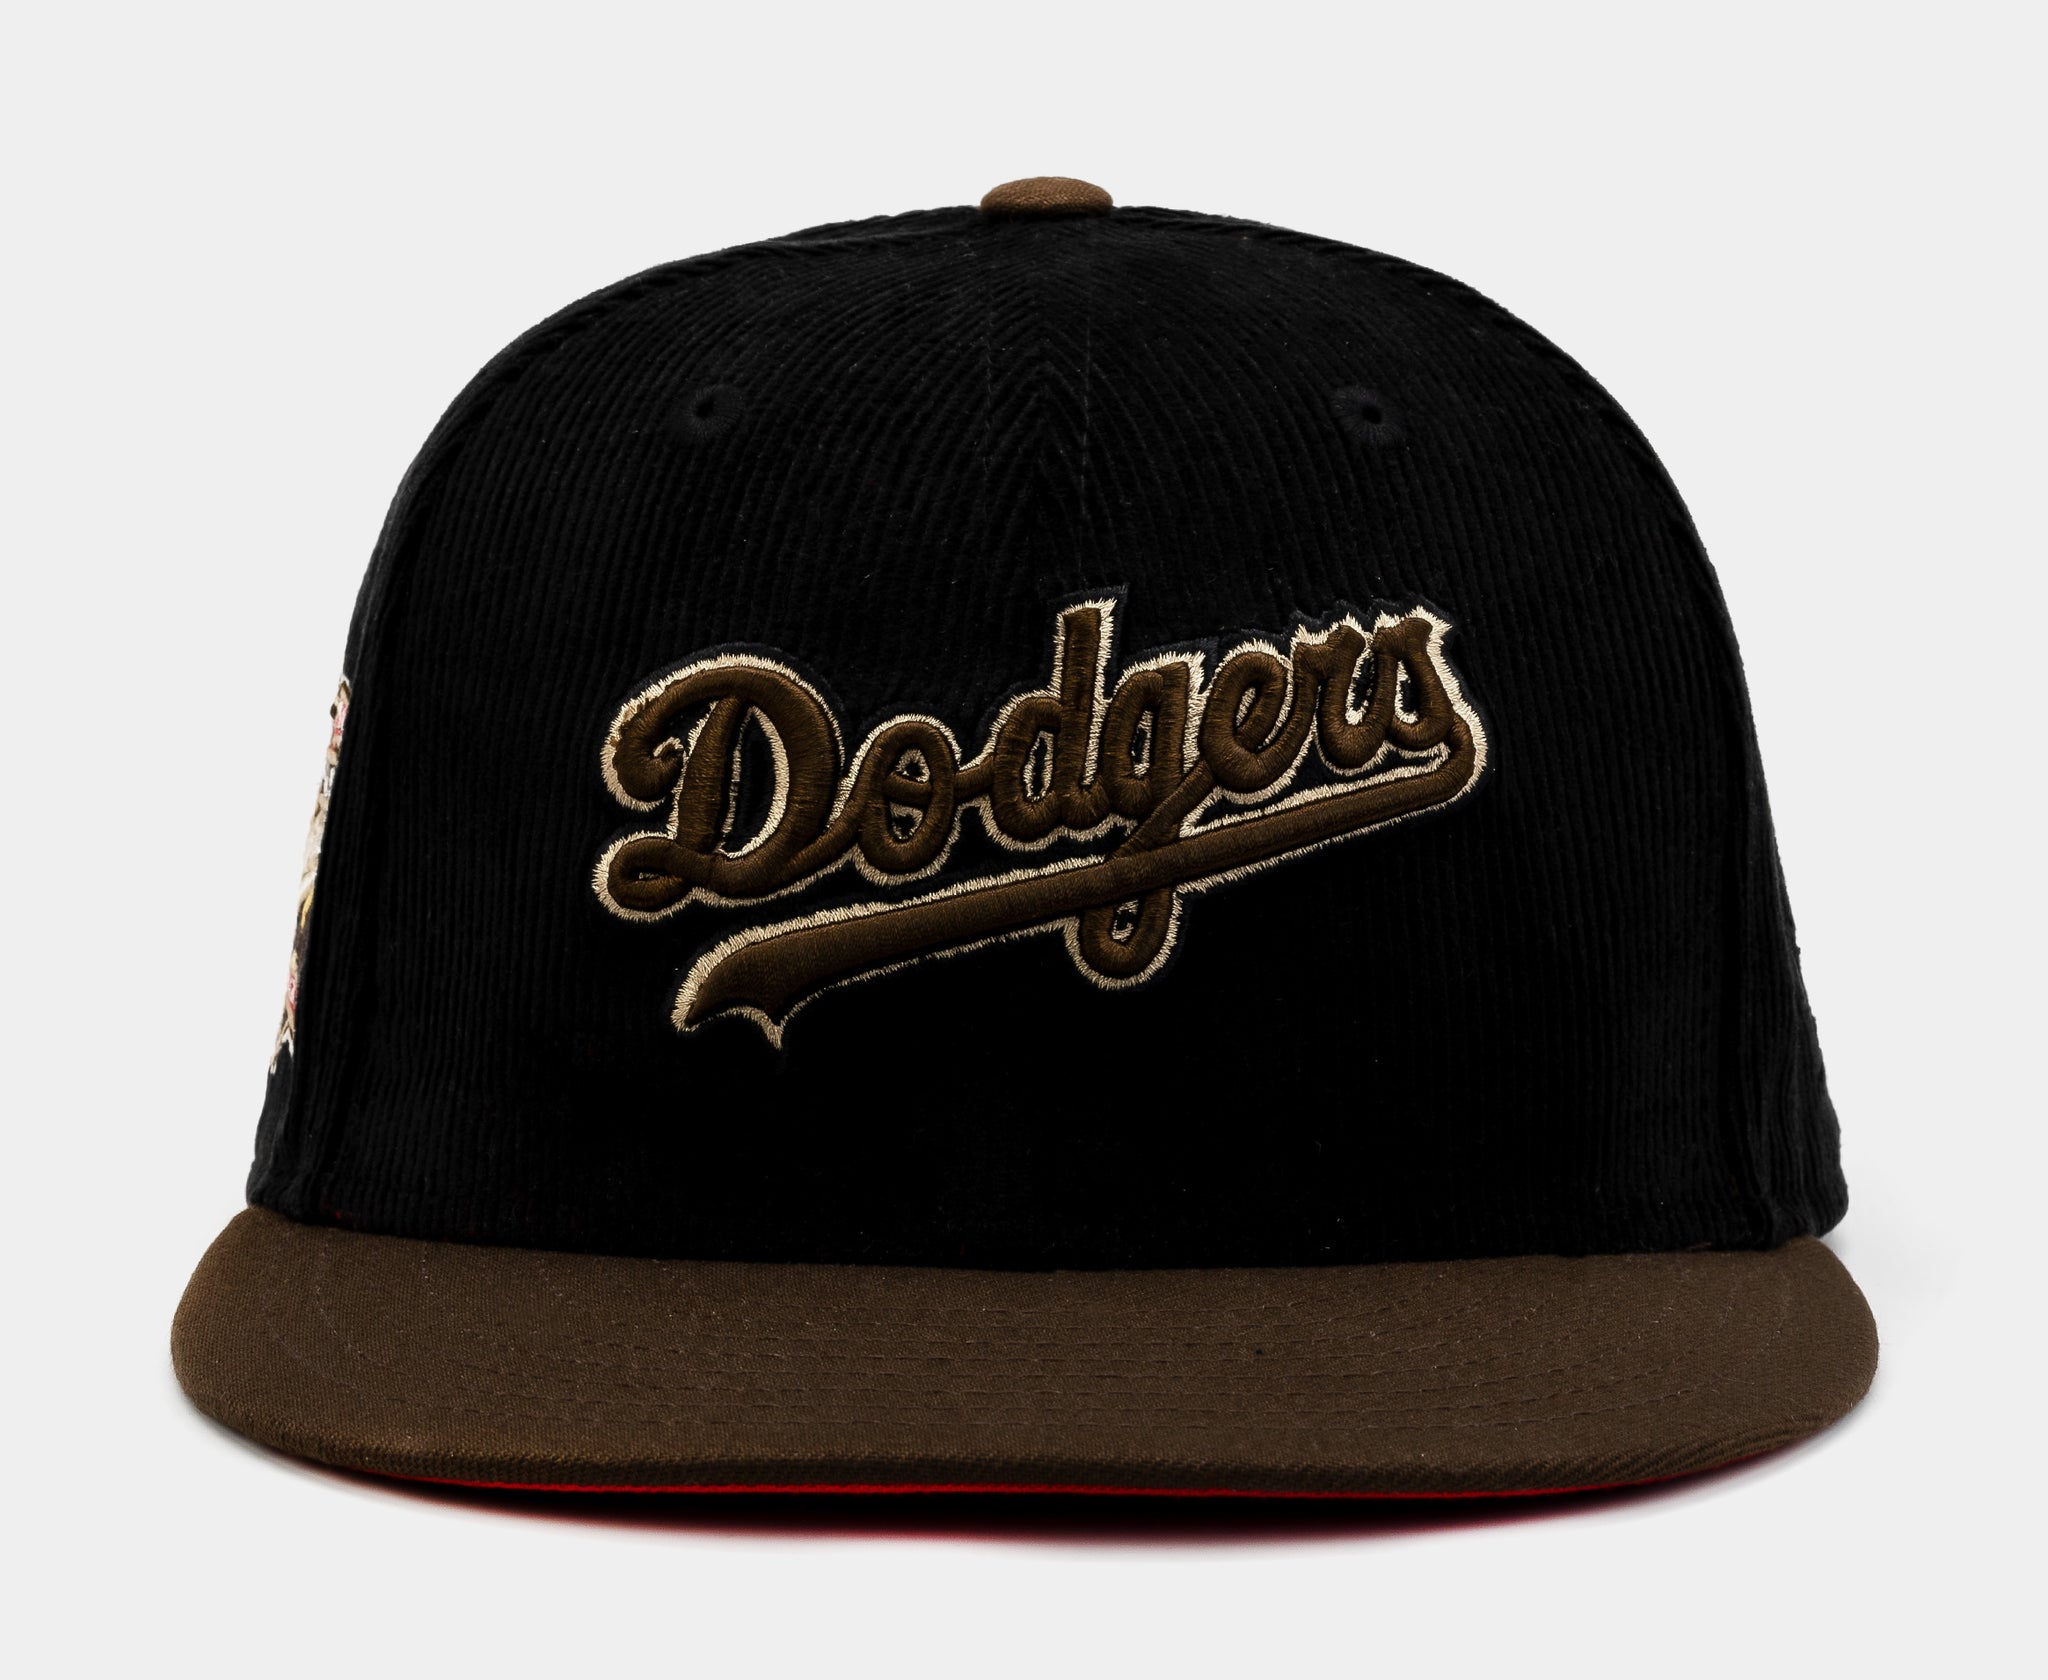 Los Angeles Dodgers Brown New Era 59Fifty On Field Fitted Hat